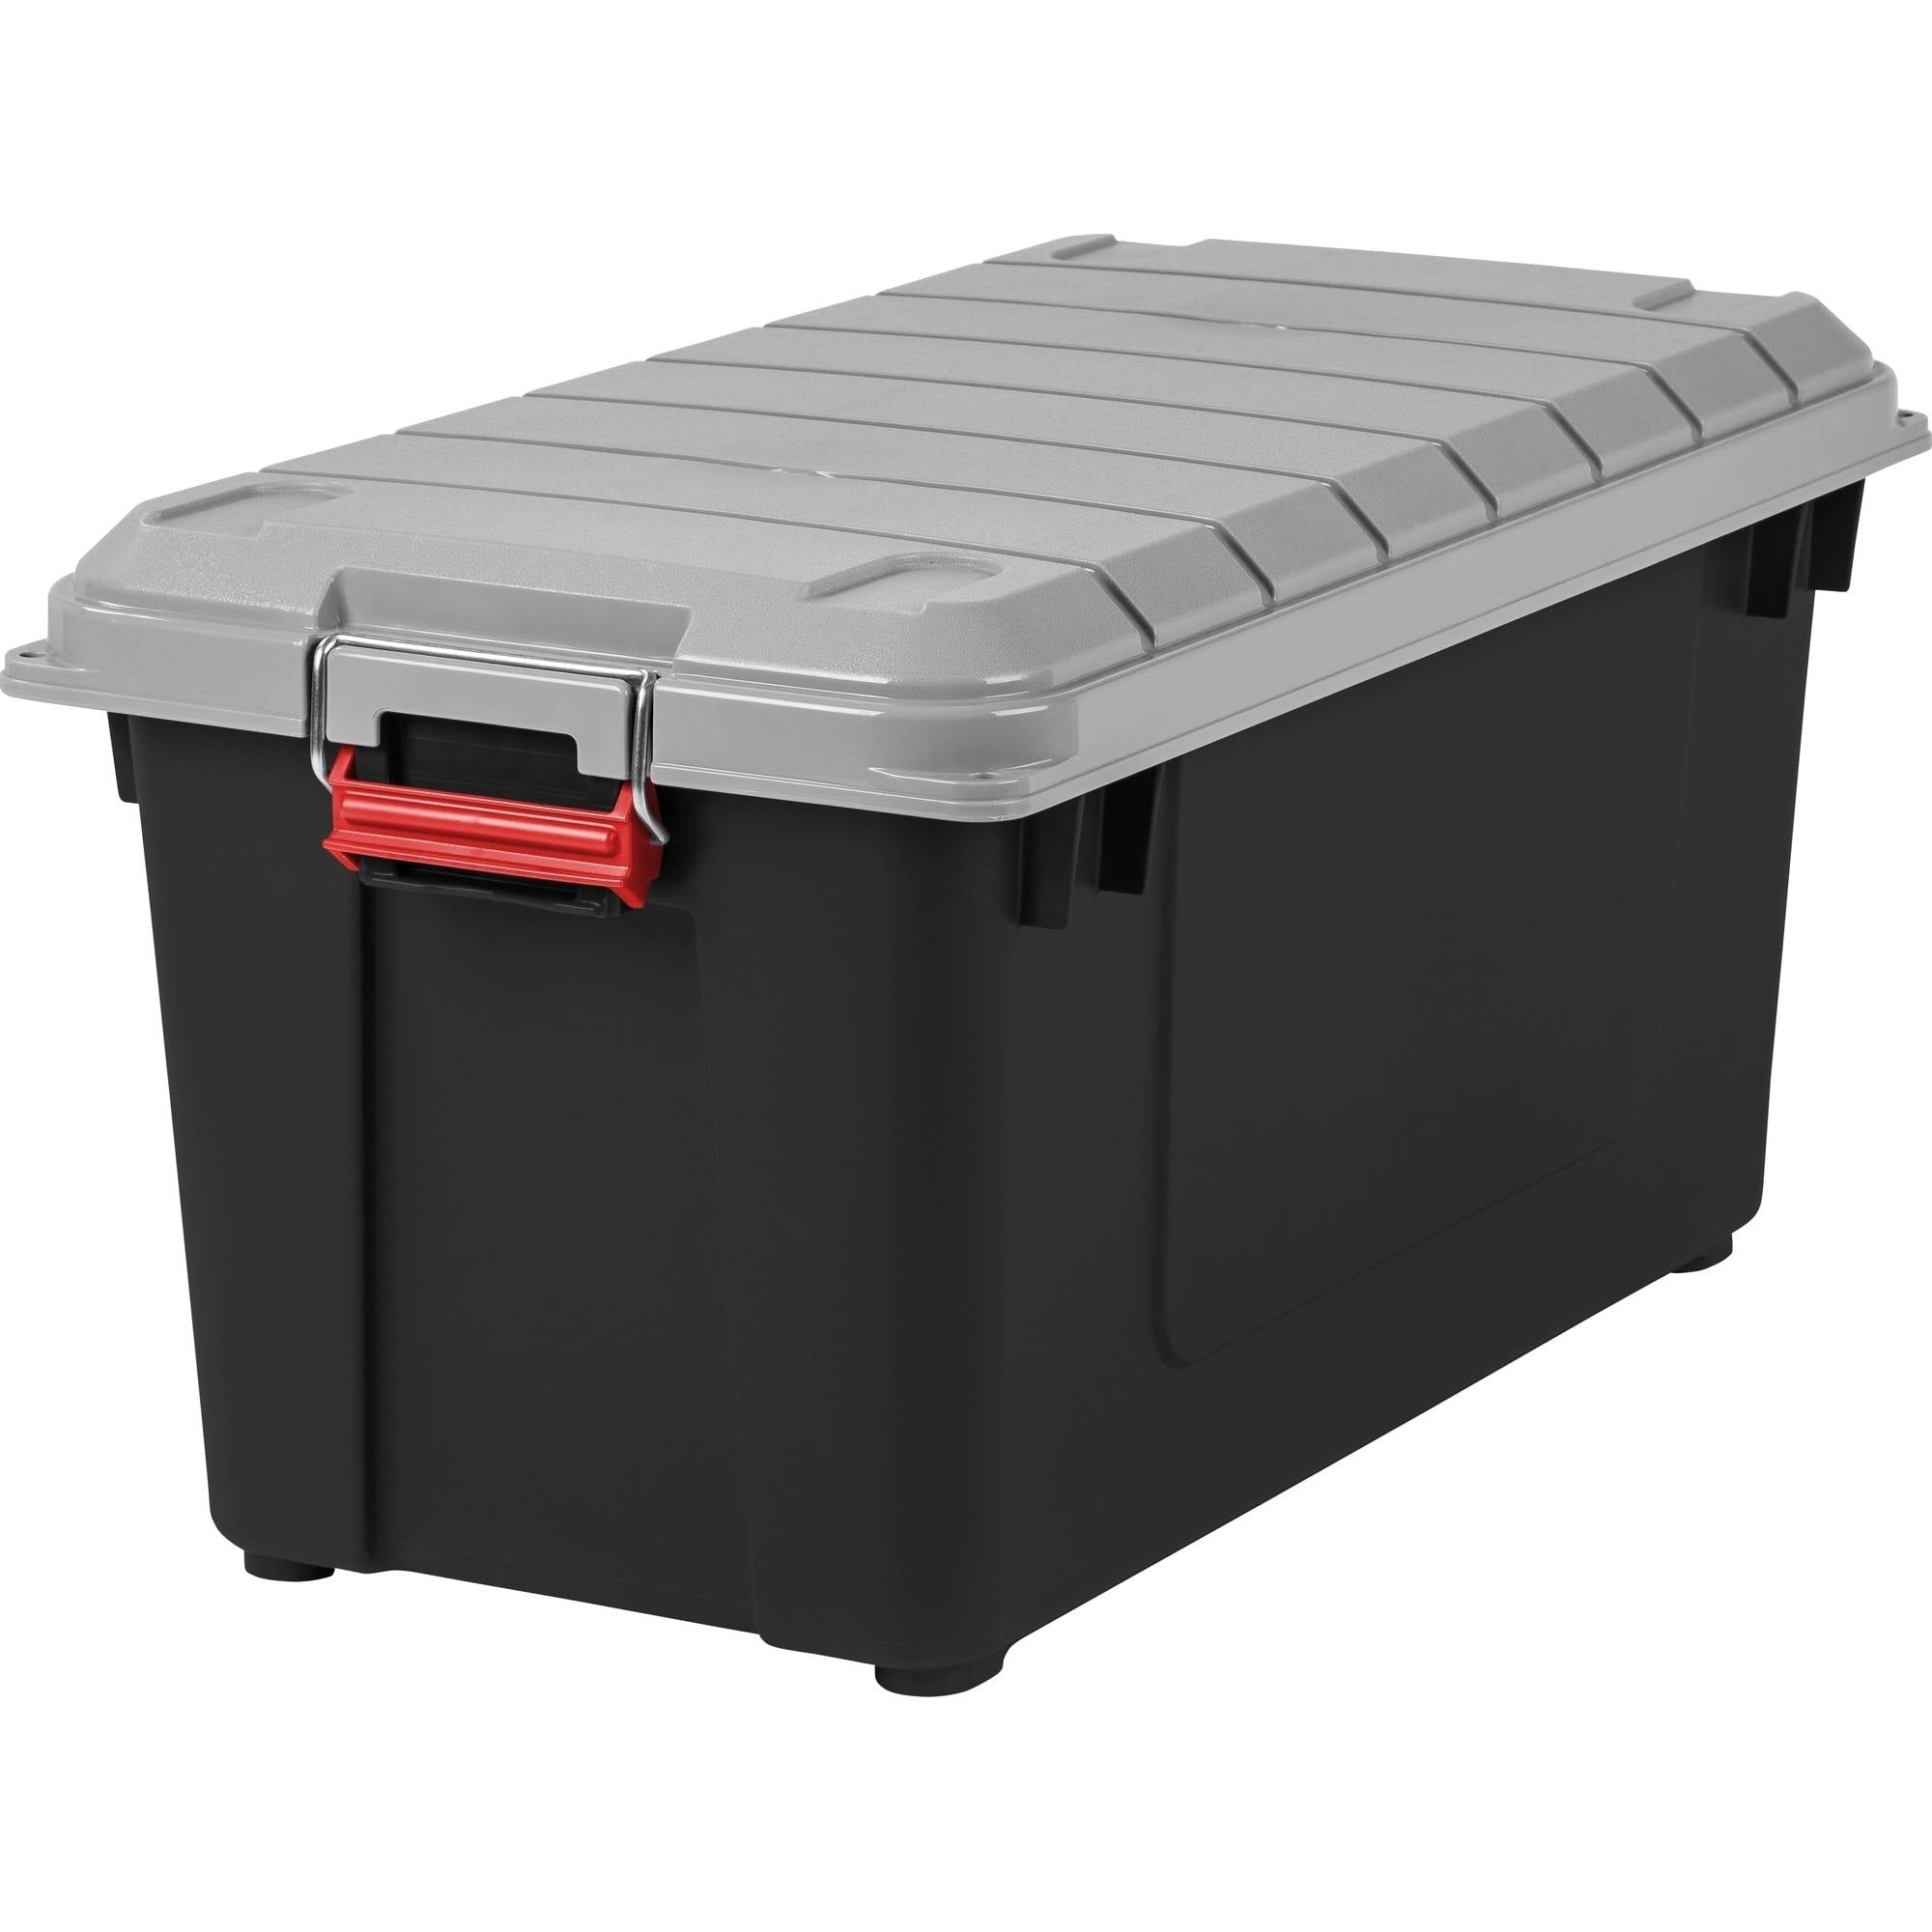 Details about   Storage Box with Metal Latches Weathertight Gasket Totes Containers 21 Gal 